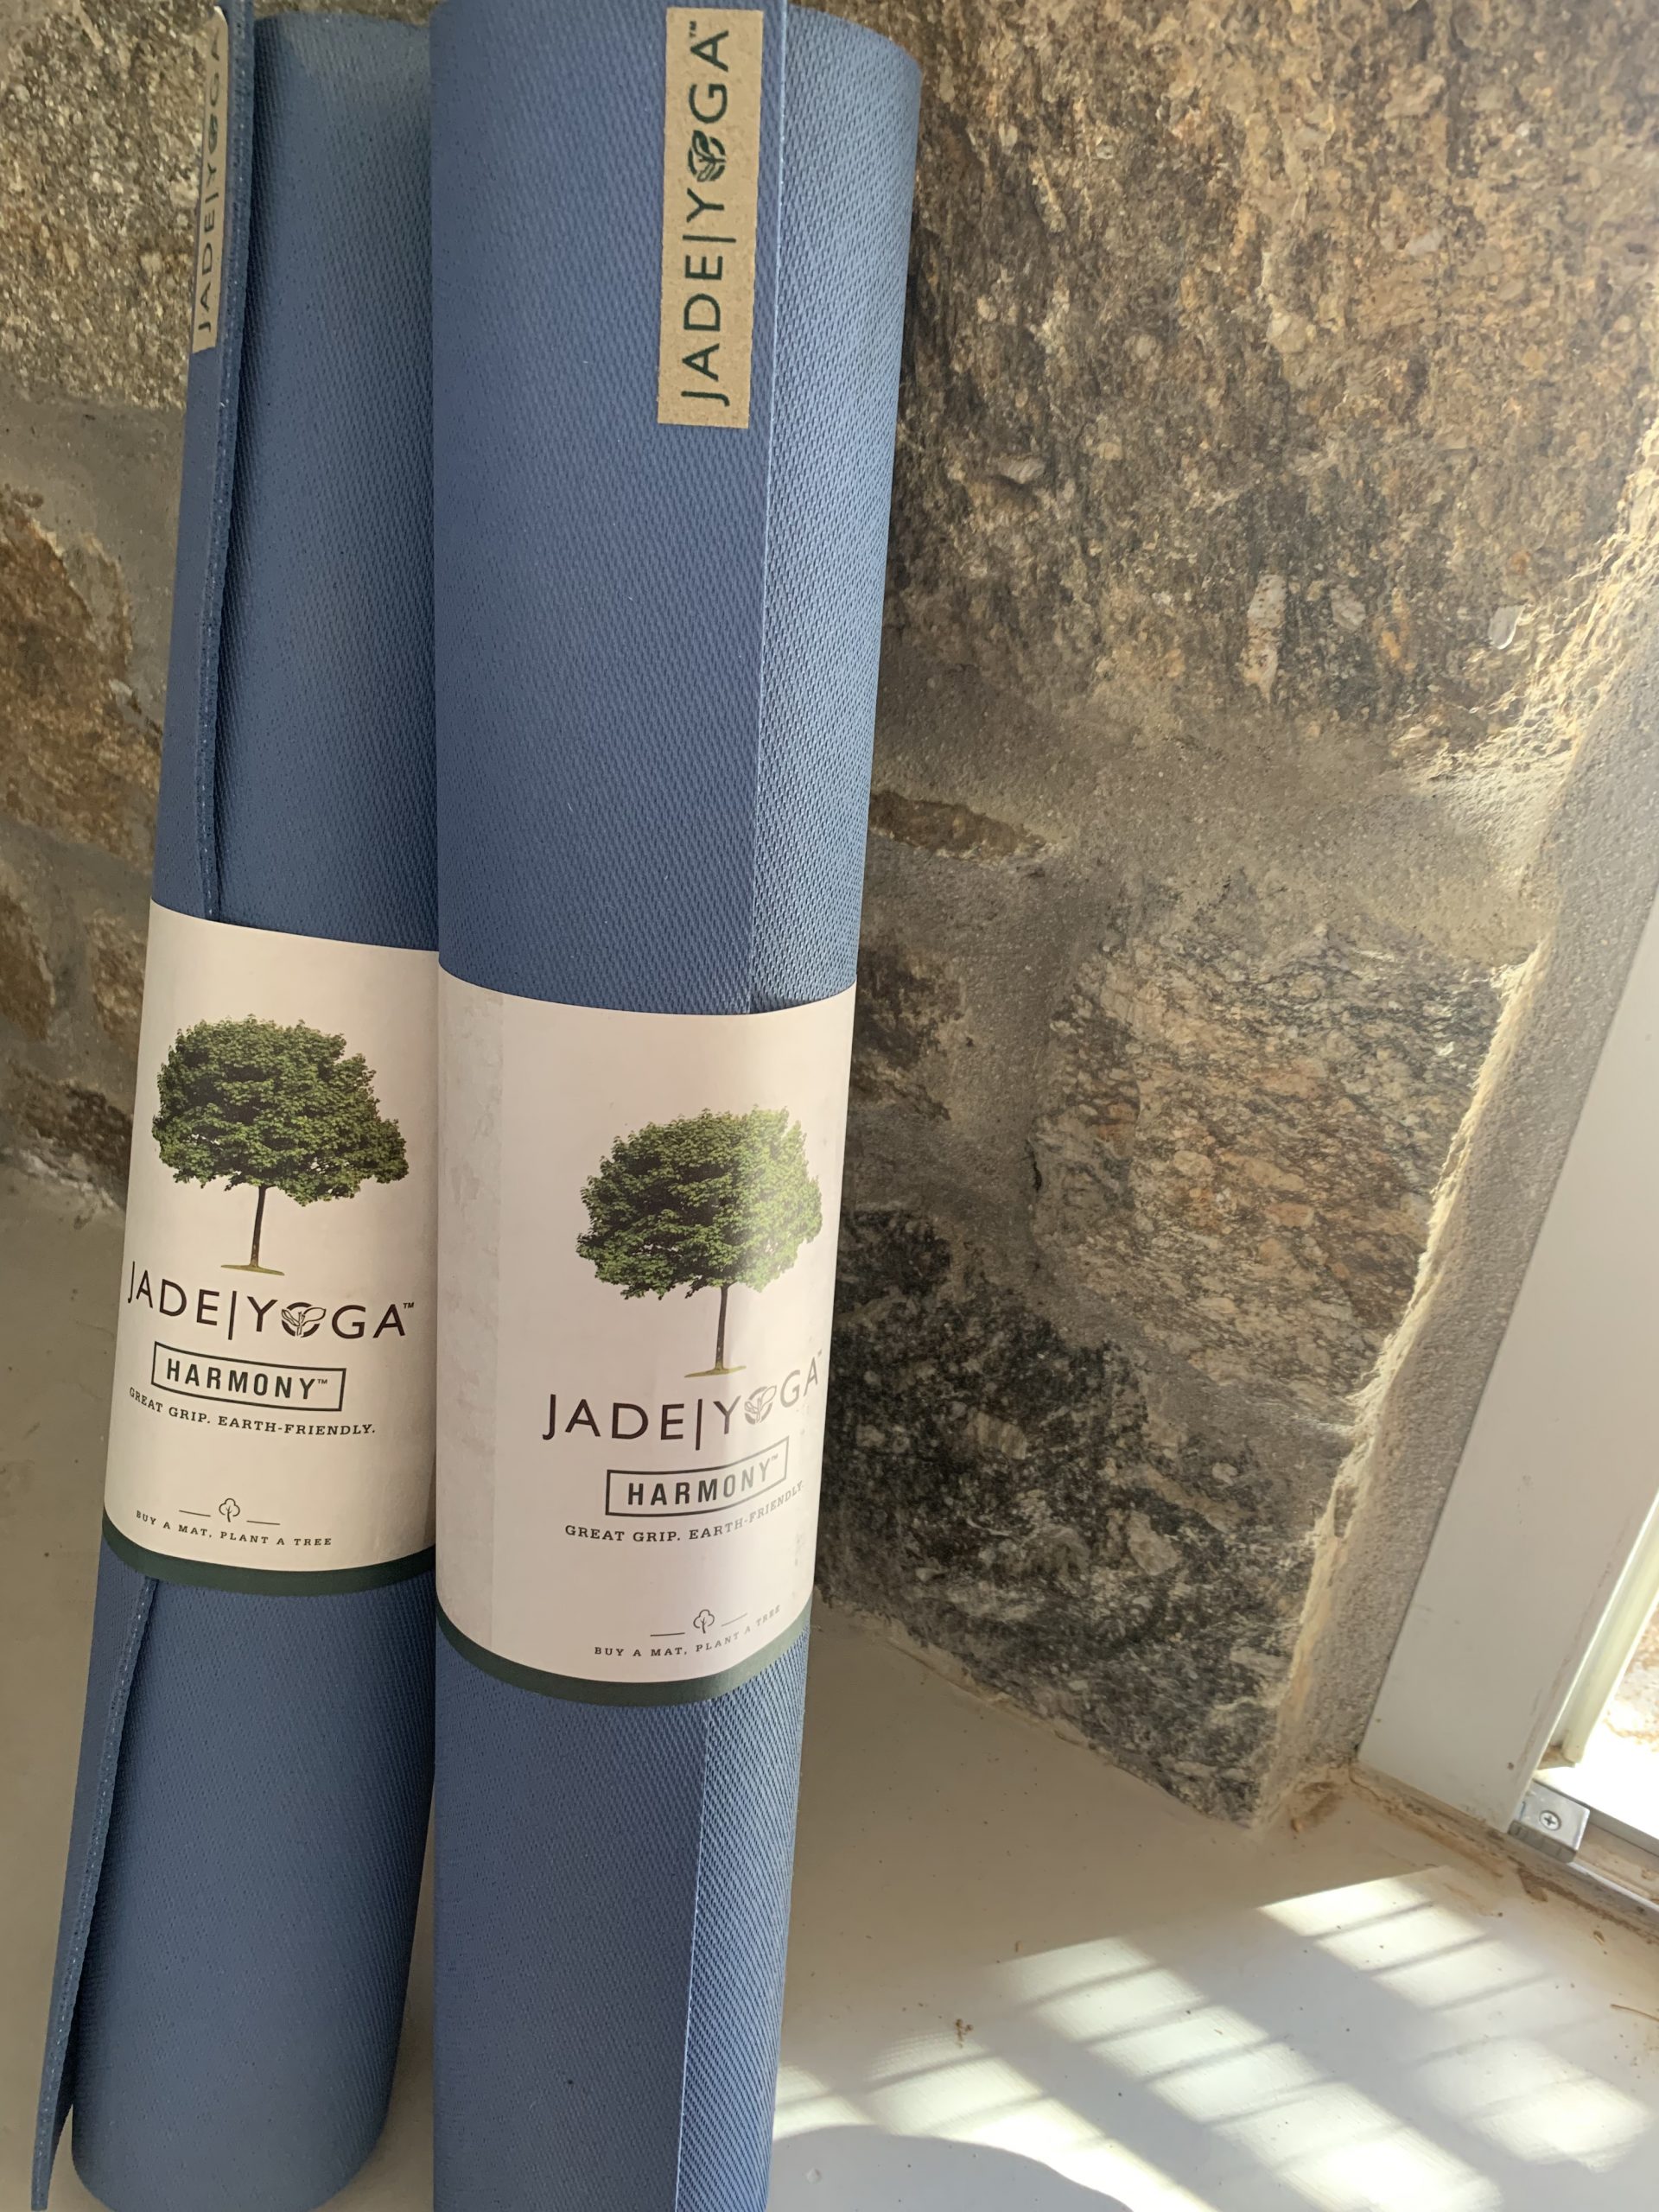 Jade harmony yoga mat • Compare & see prices now »